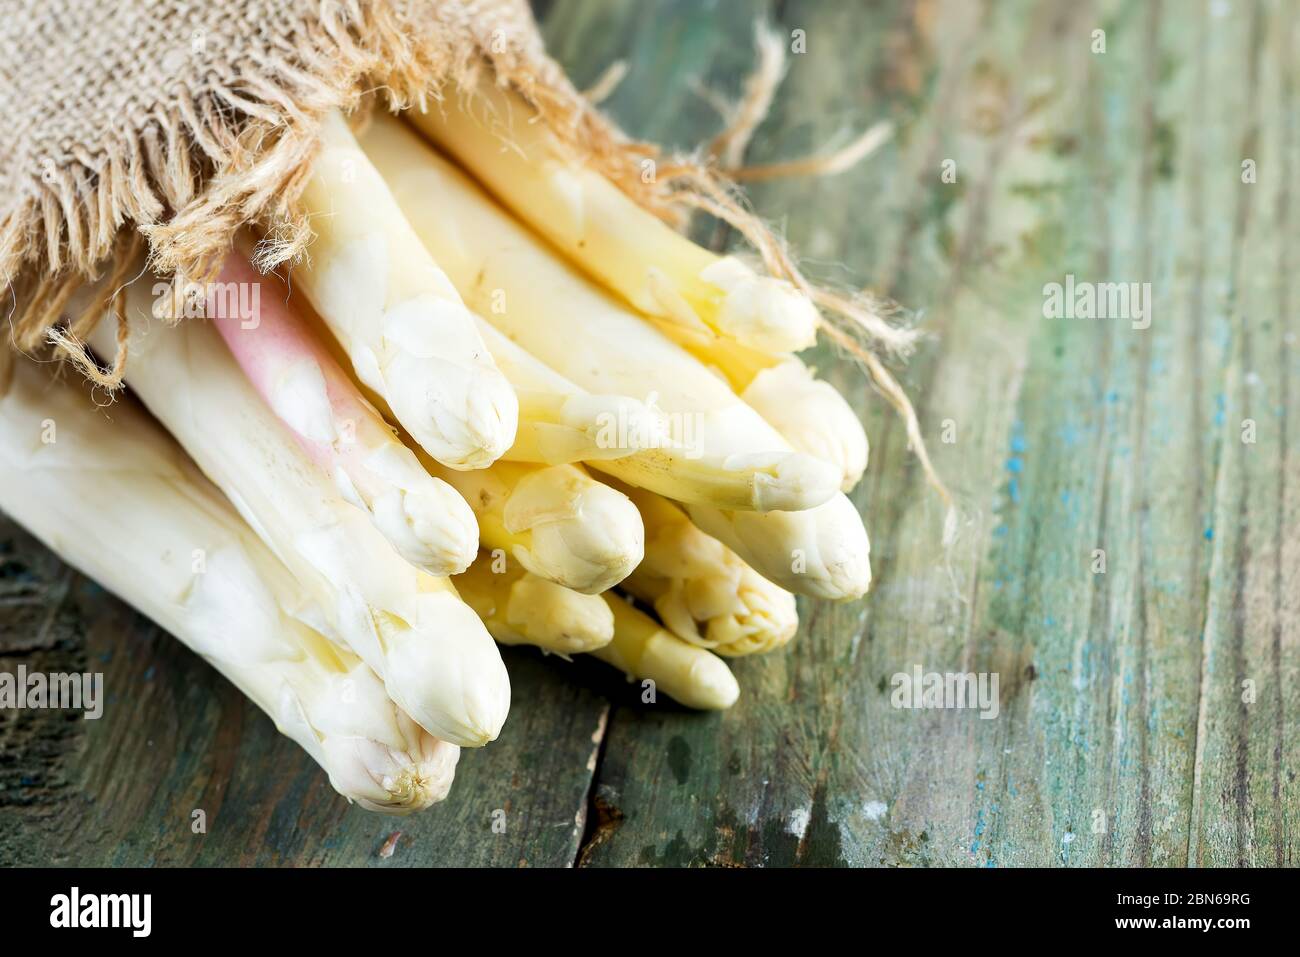 Freshly picked natural organic bunch of white asparagus vegetables on a wooden background. Stock Photo